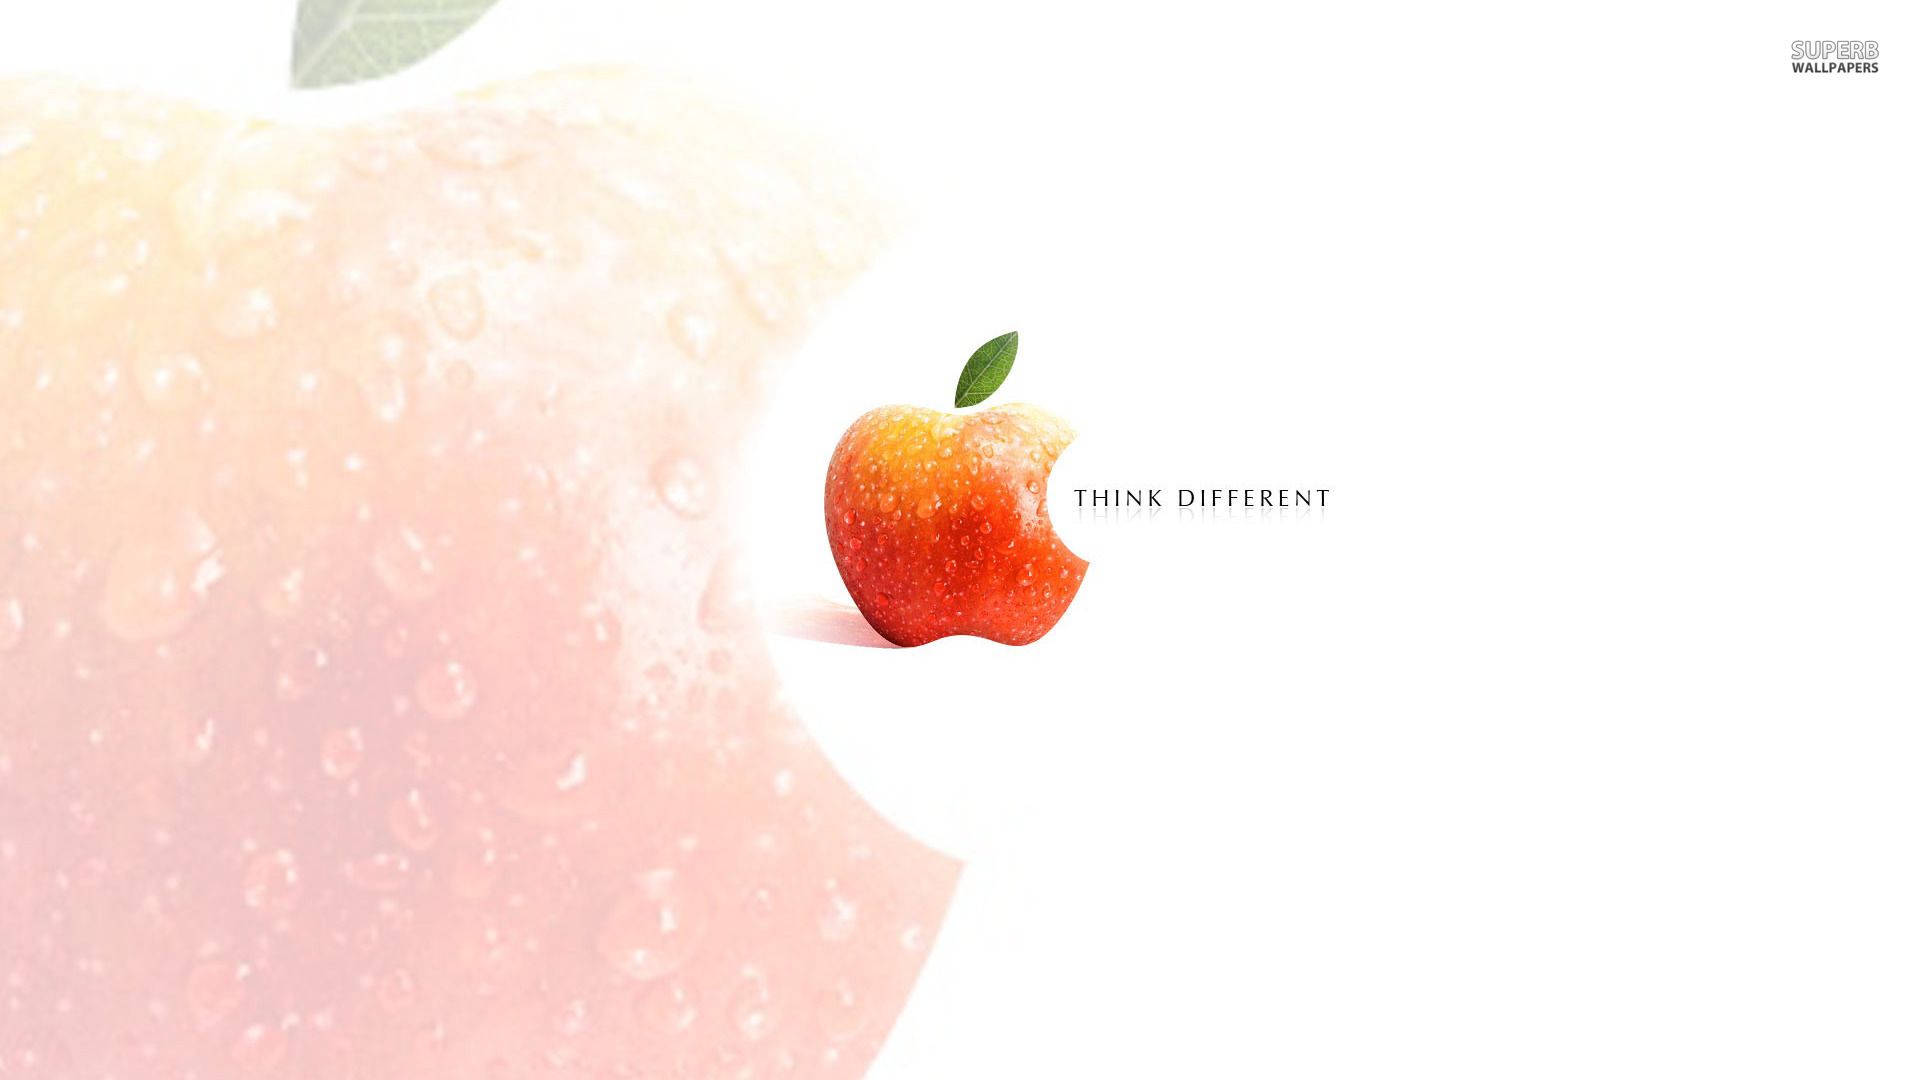 Apple - Think different wallpaper - Computer wallpapers - #19703